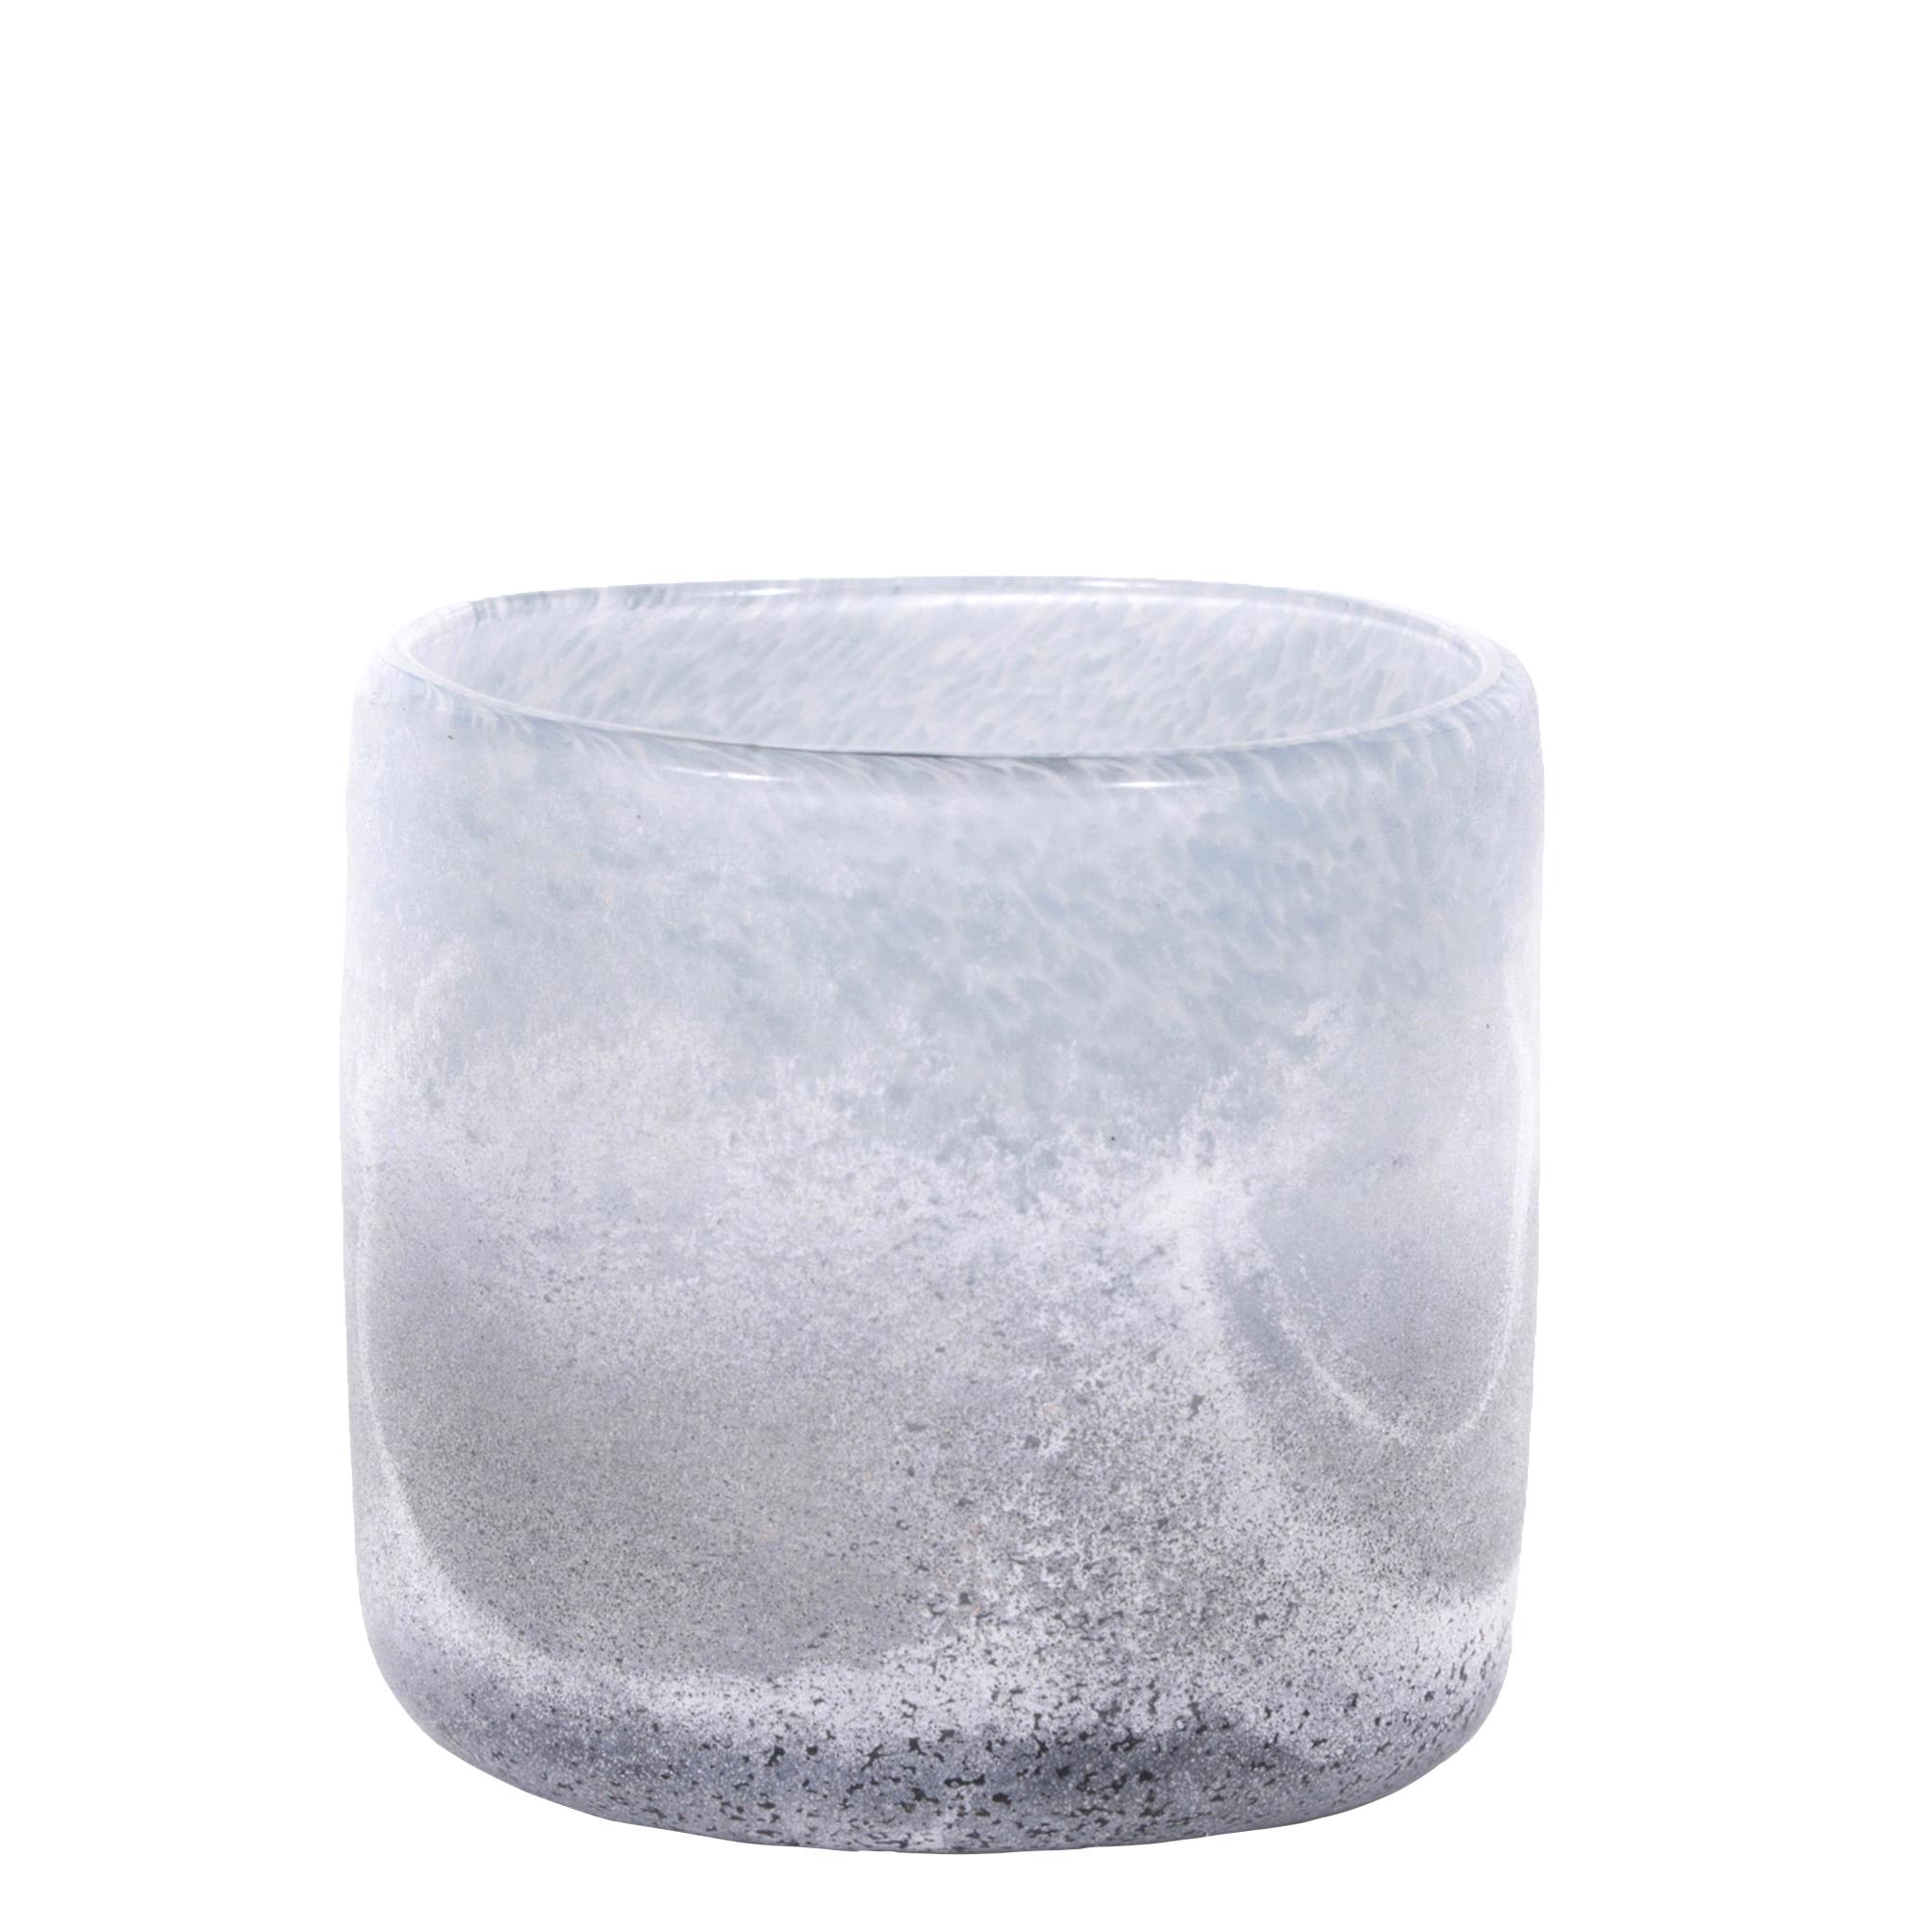 VASO P/CANDELE FROSTED 8,5XH.9 CM**SC